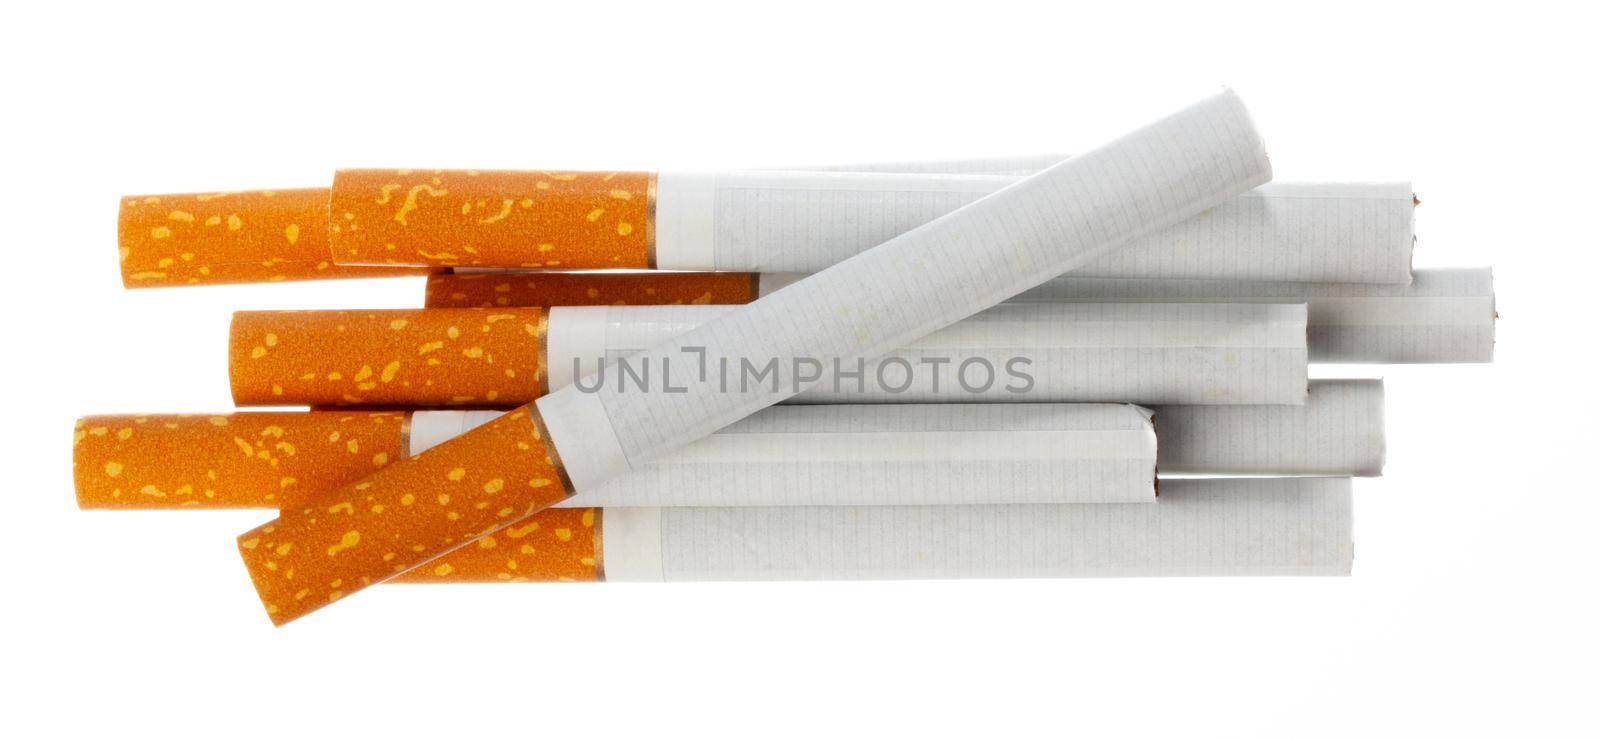 Bunch of unlit cigarettes isolated on white background